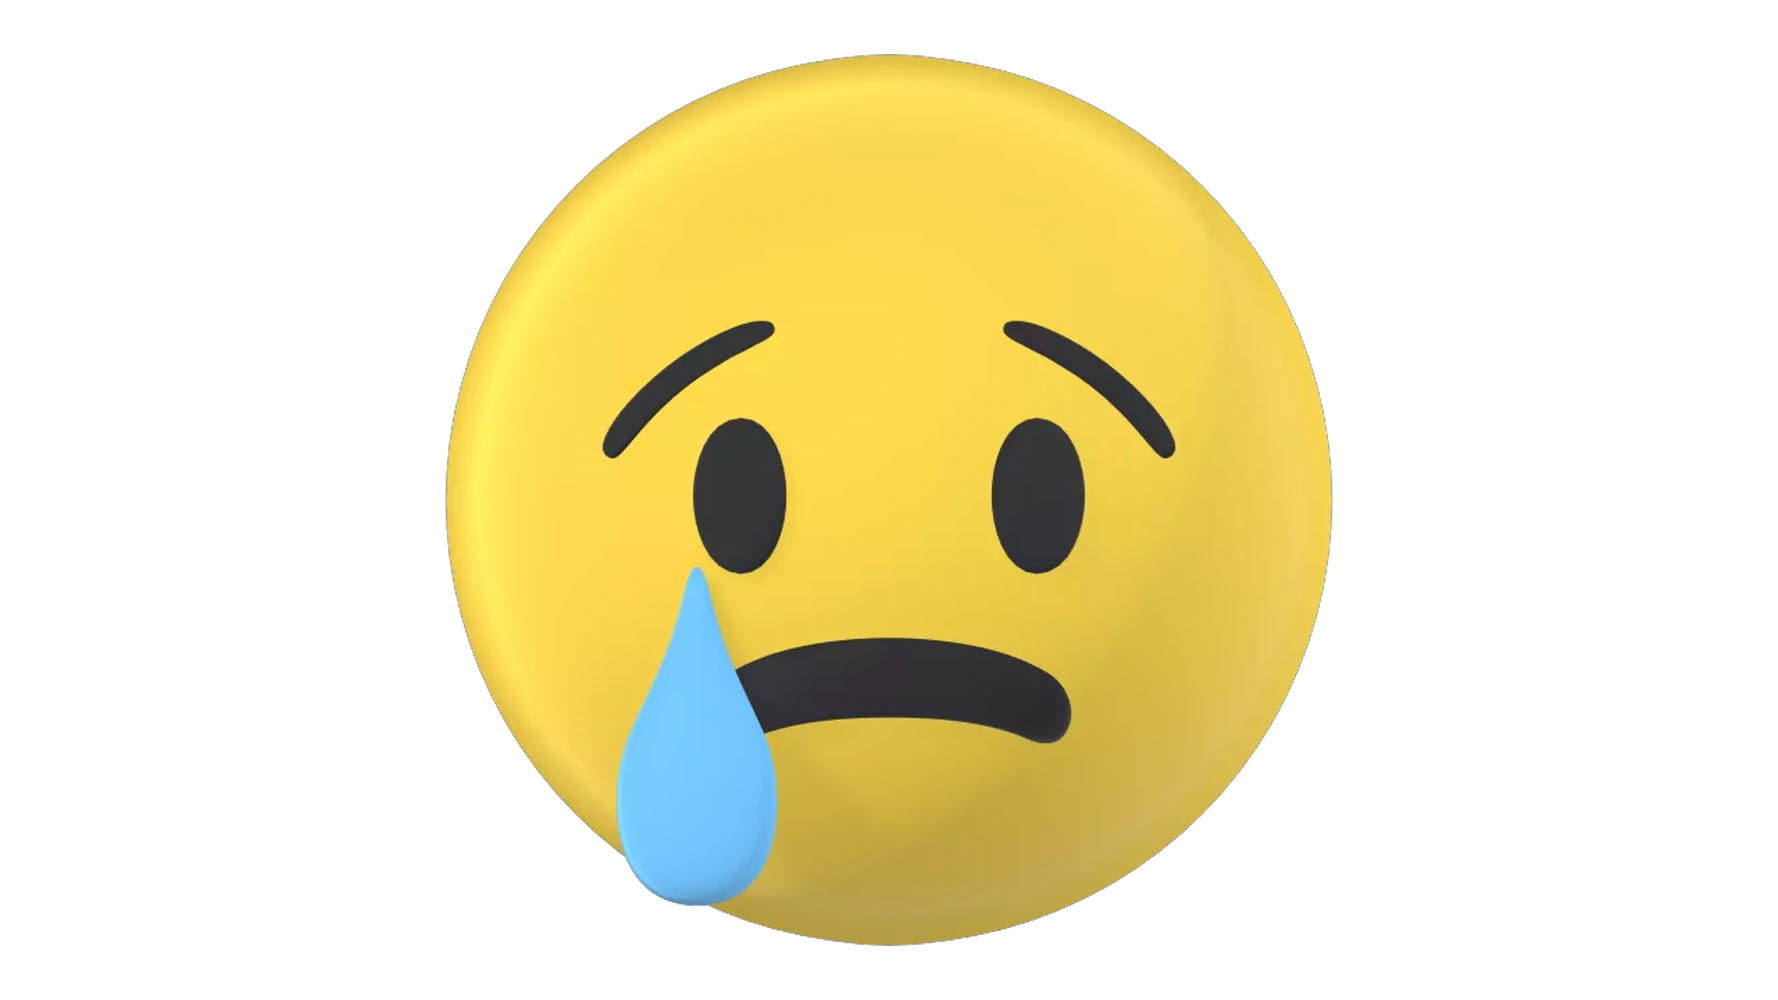 Crying Face 3D Graphic